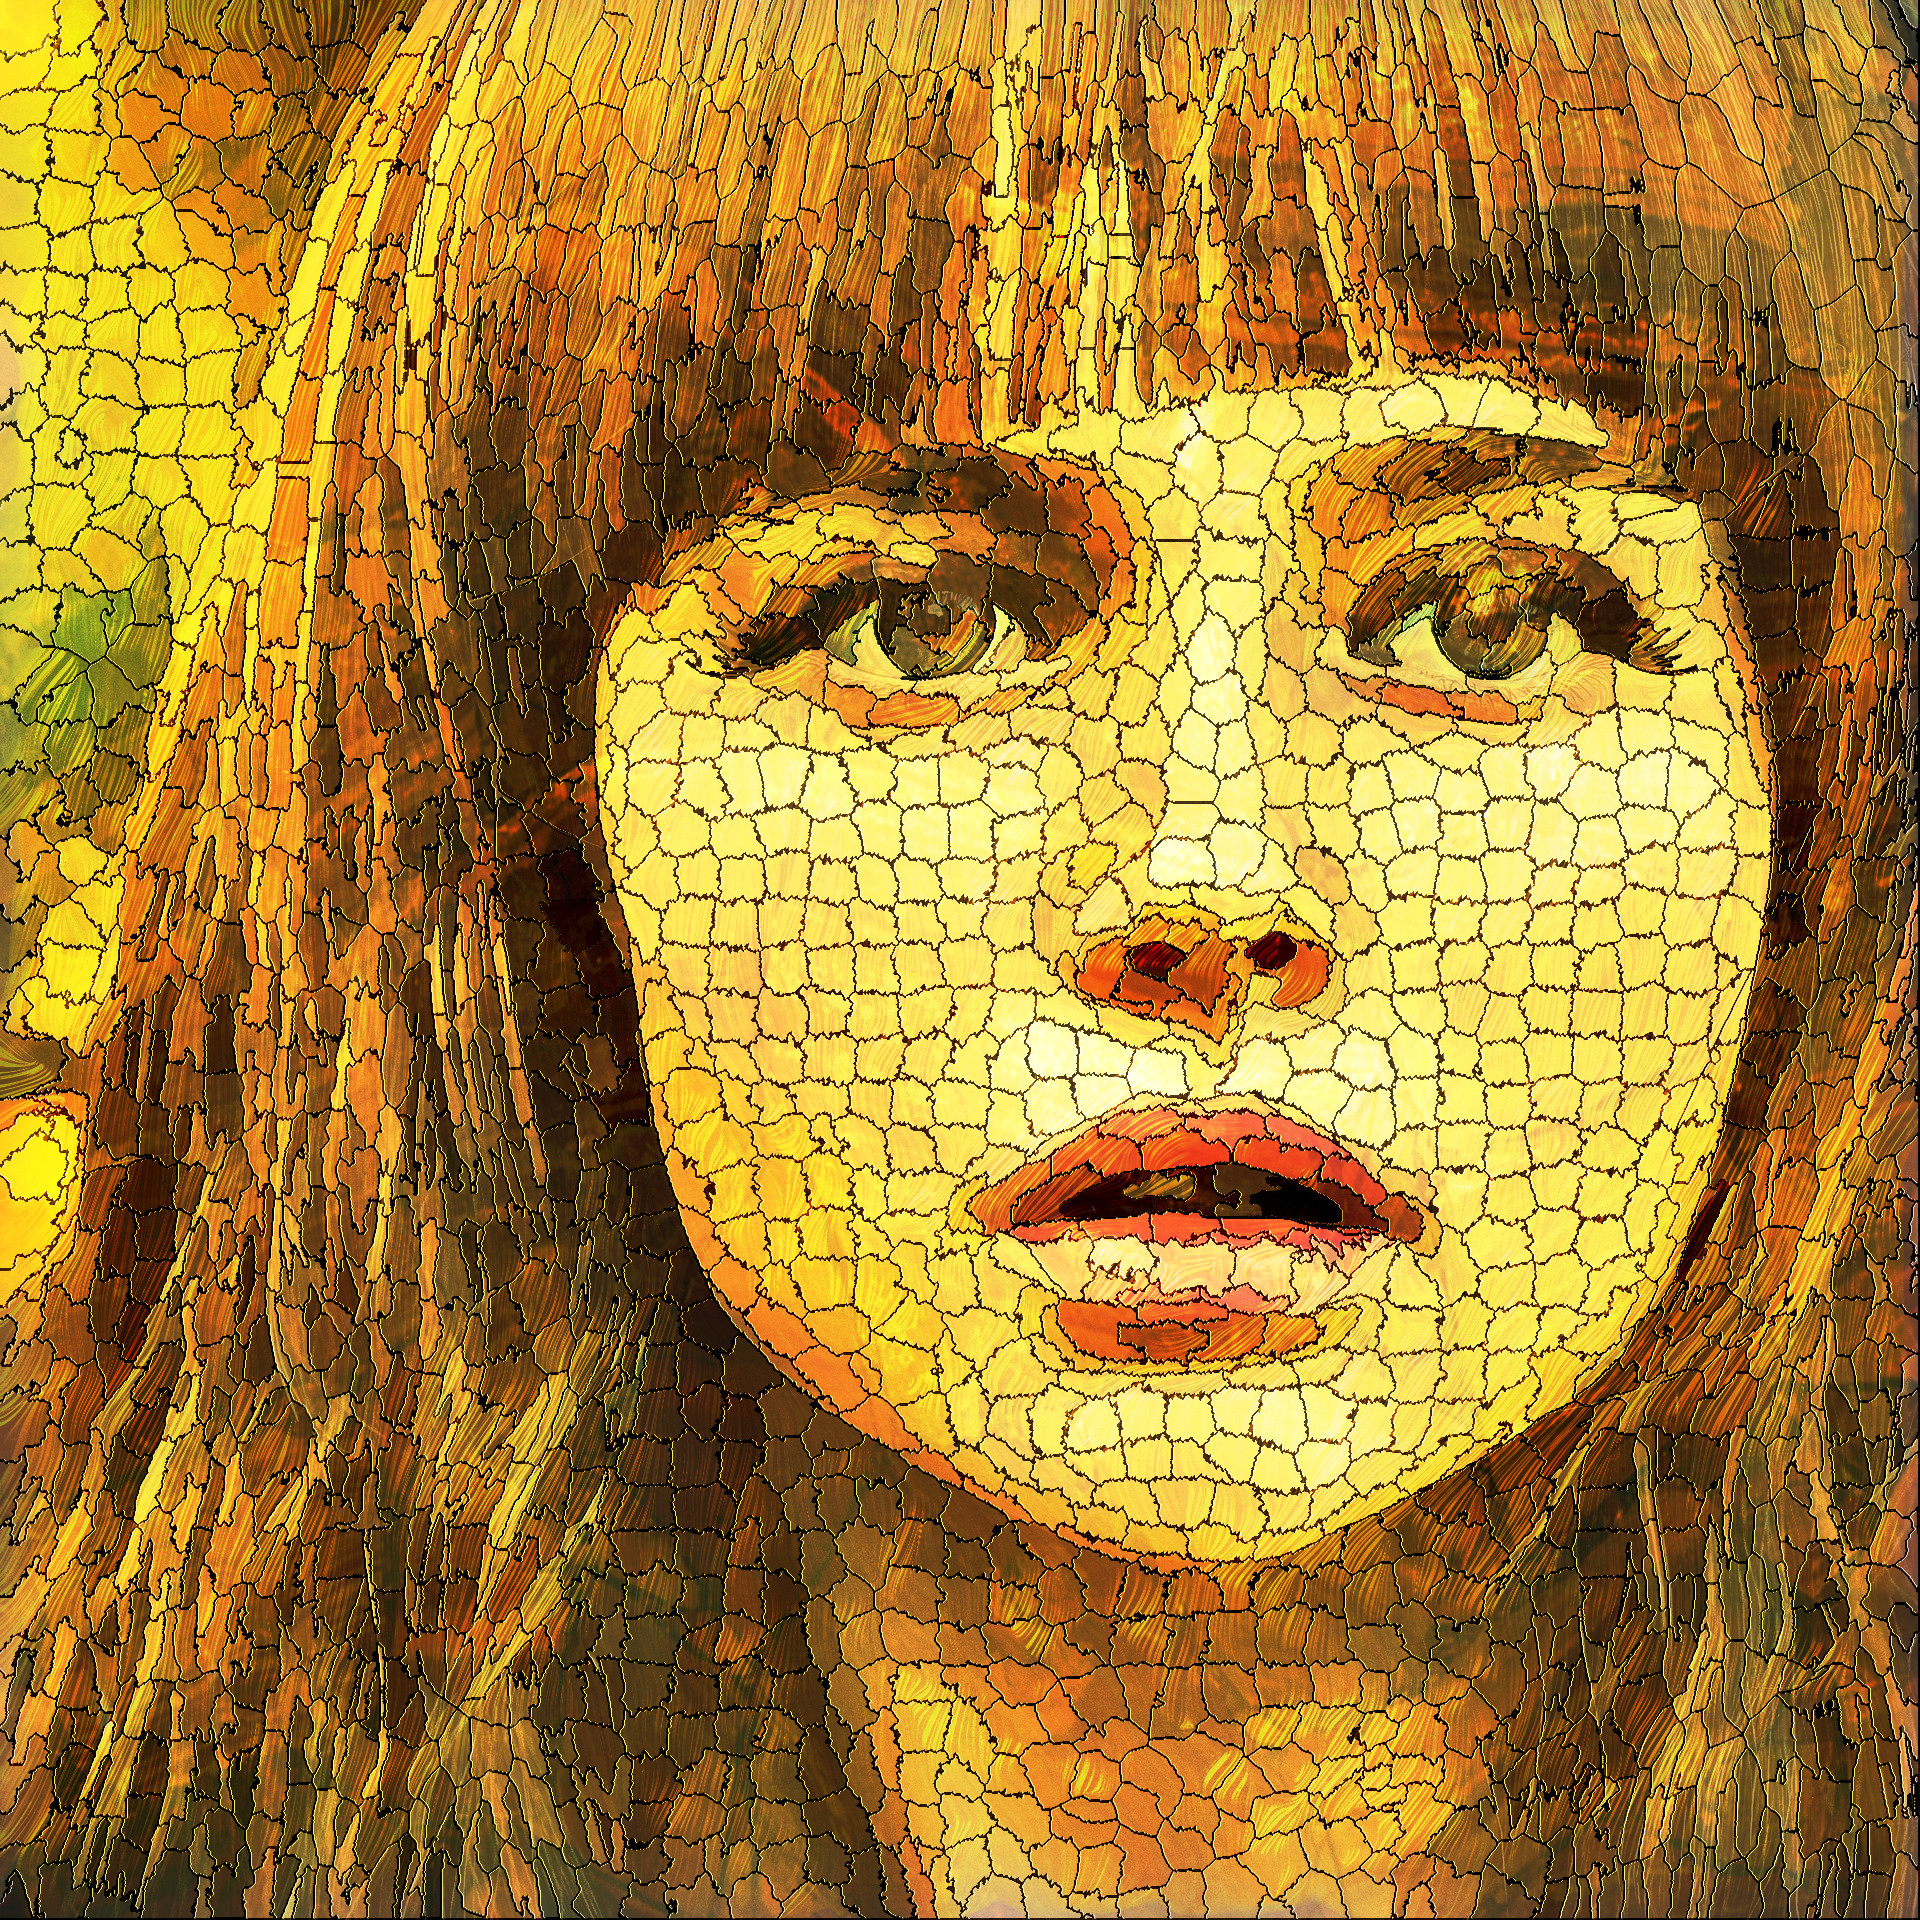 2023-09-02 09-13-17girl-2052641_1920 with a simple mosaic effect.jpeg